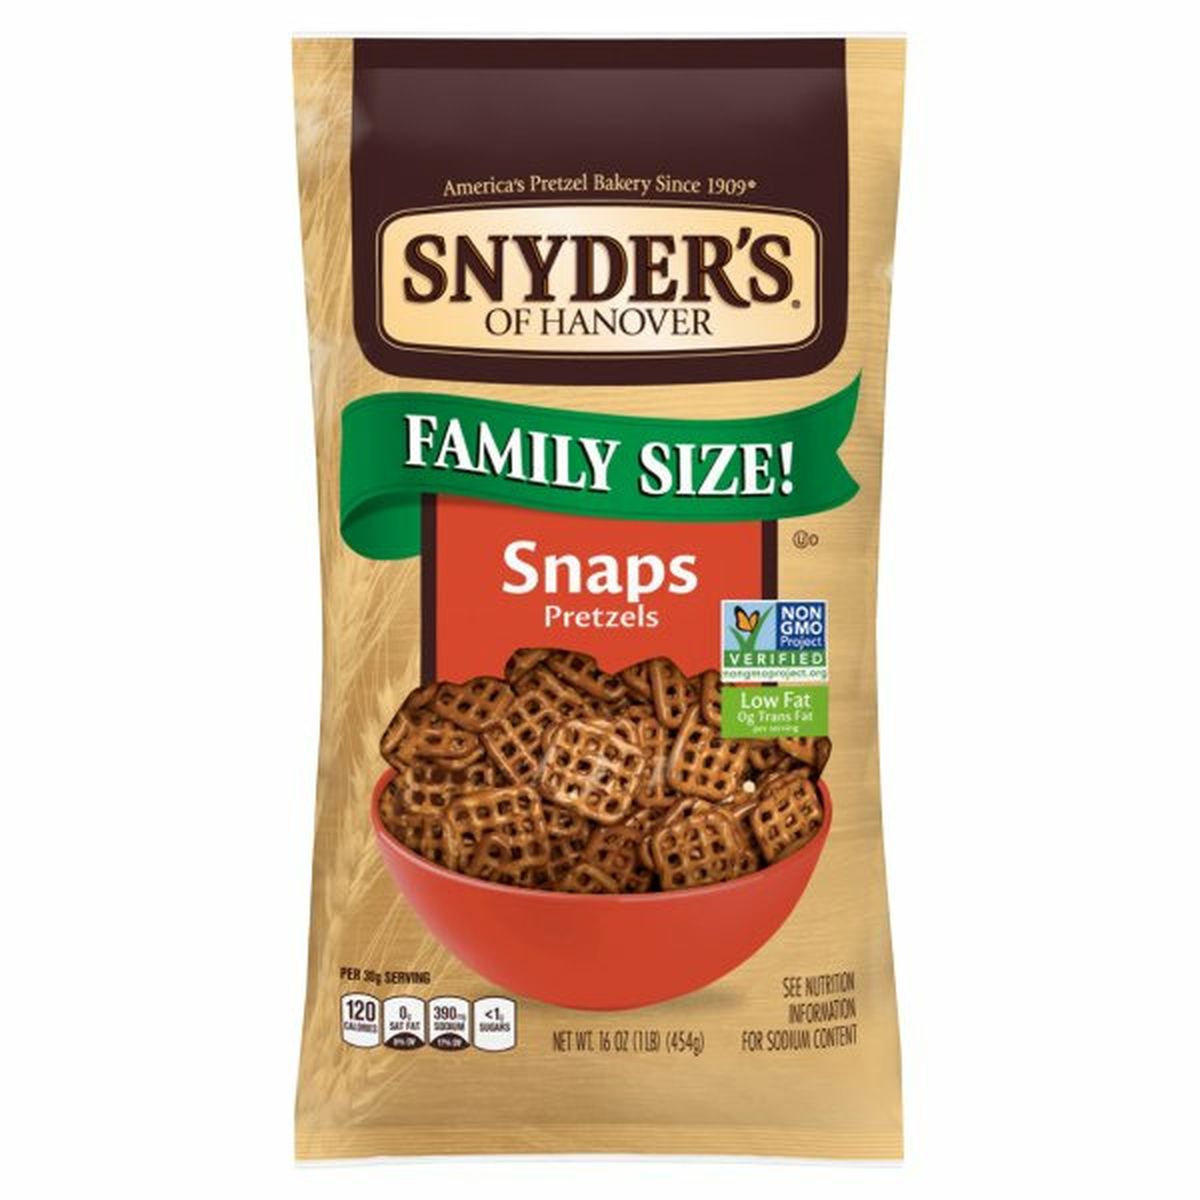 Calories in Snyder's of Hanovers Pretzels, Snaps, Family Size!